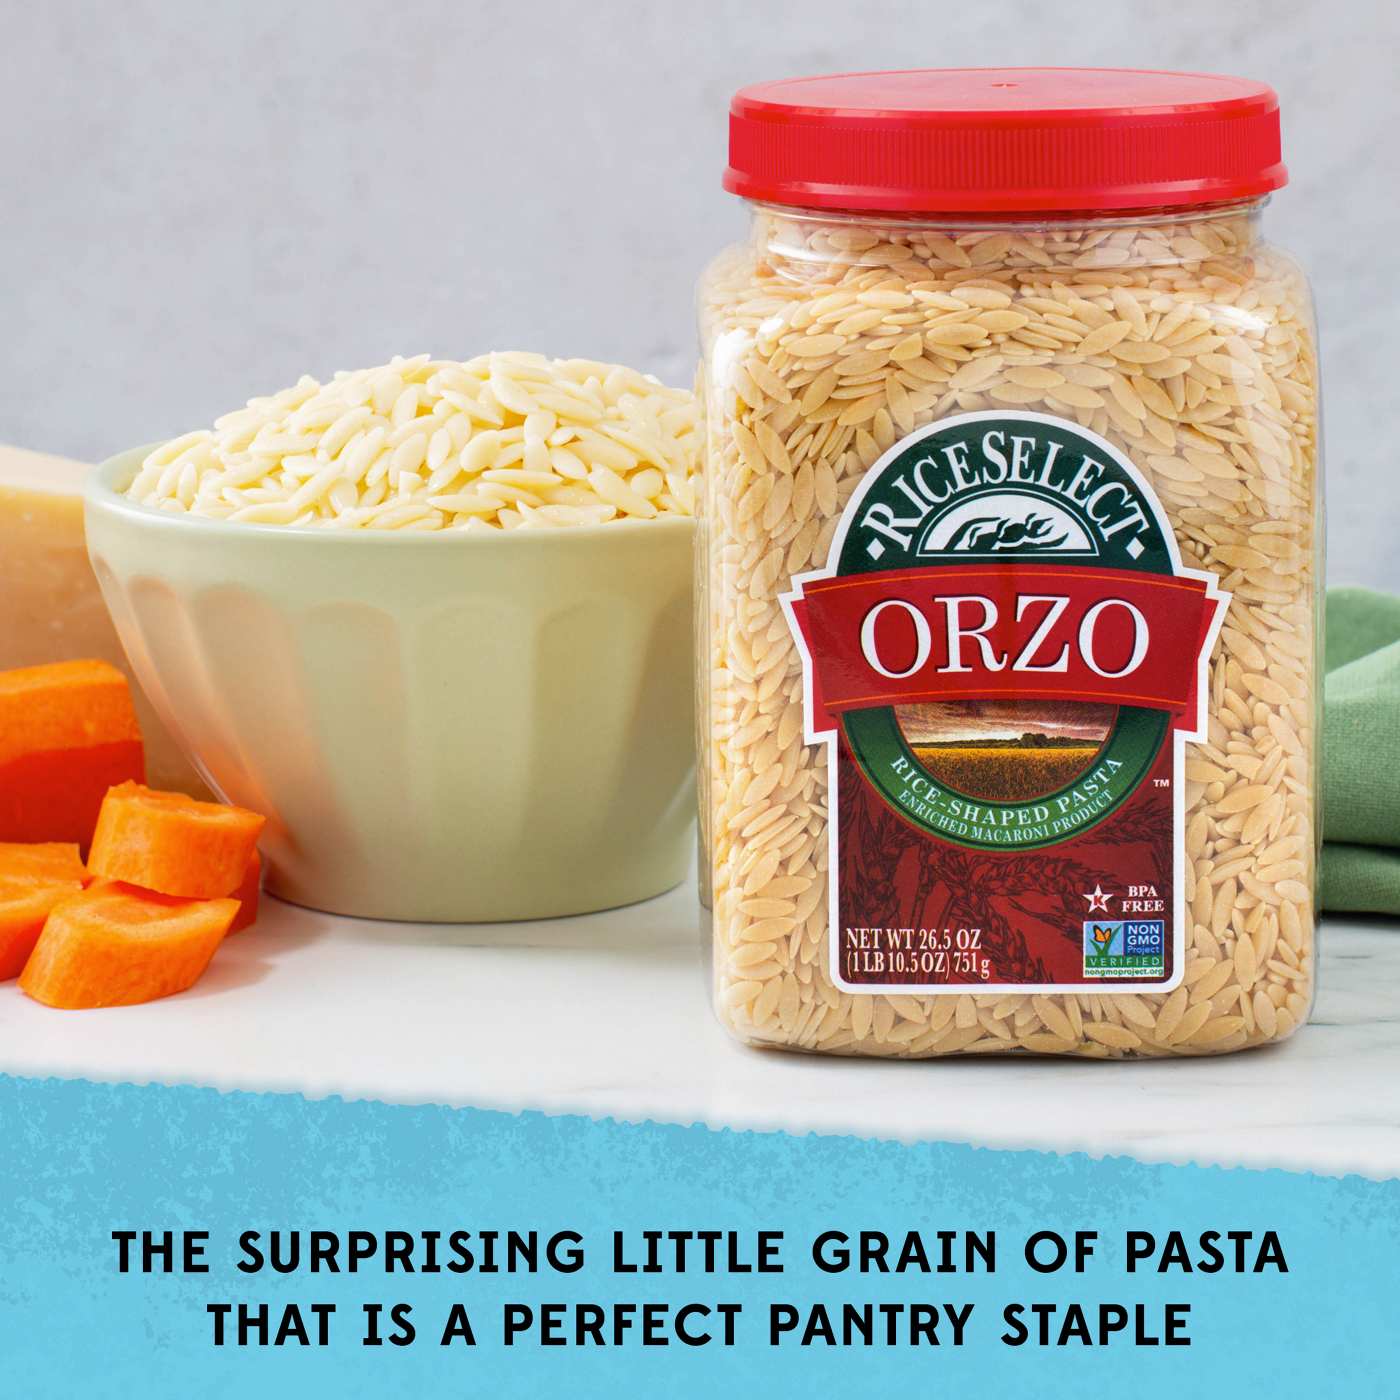 RiceSelect Original Orzo; image 2 of 6